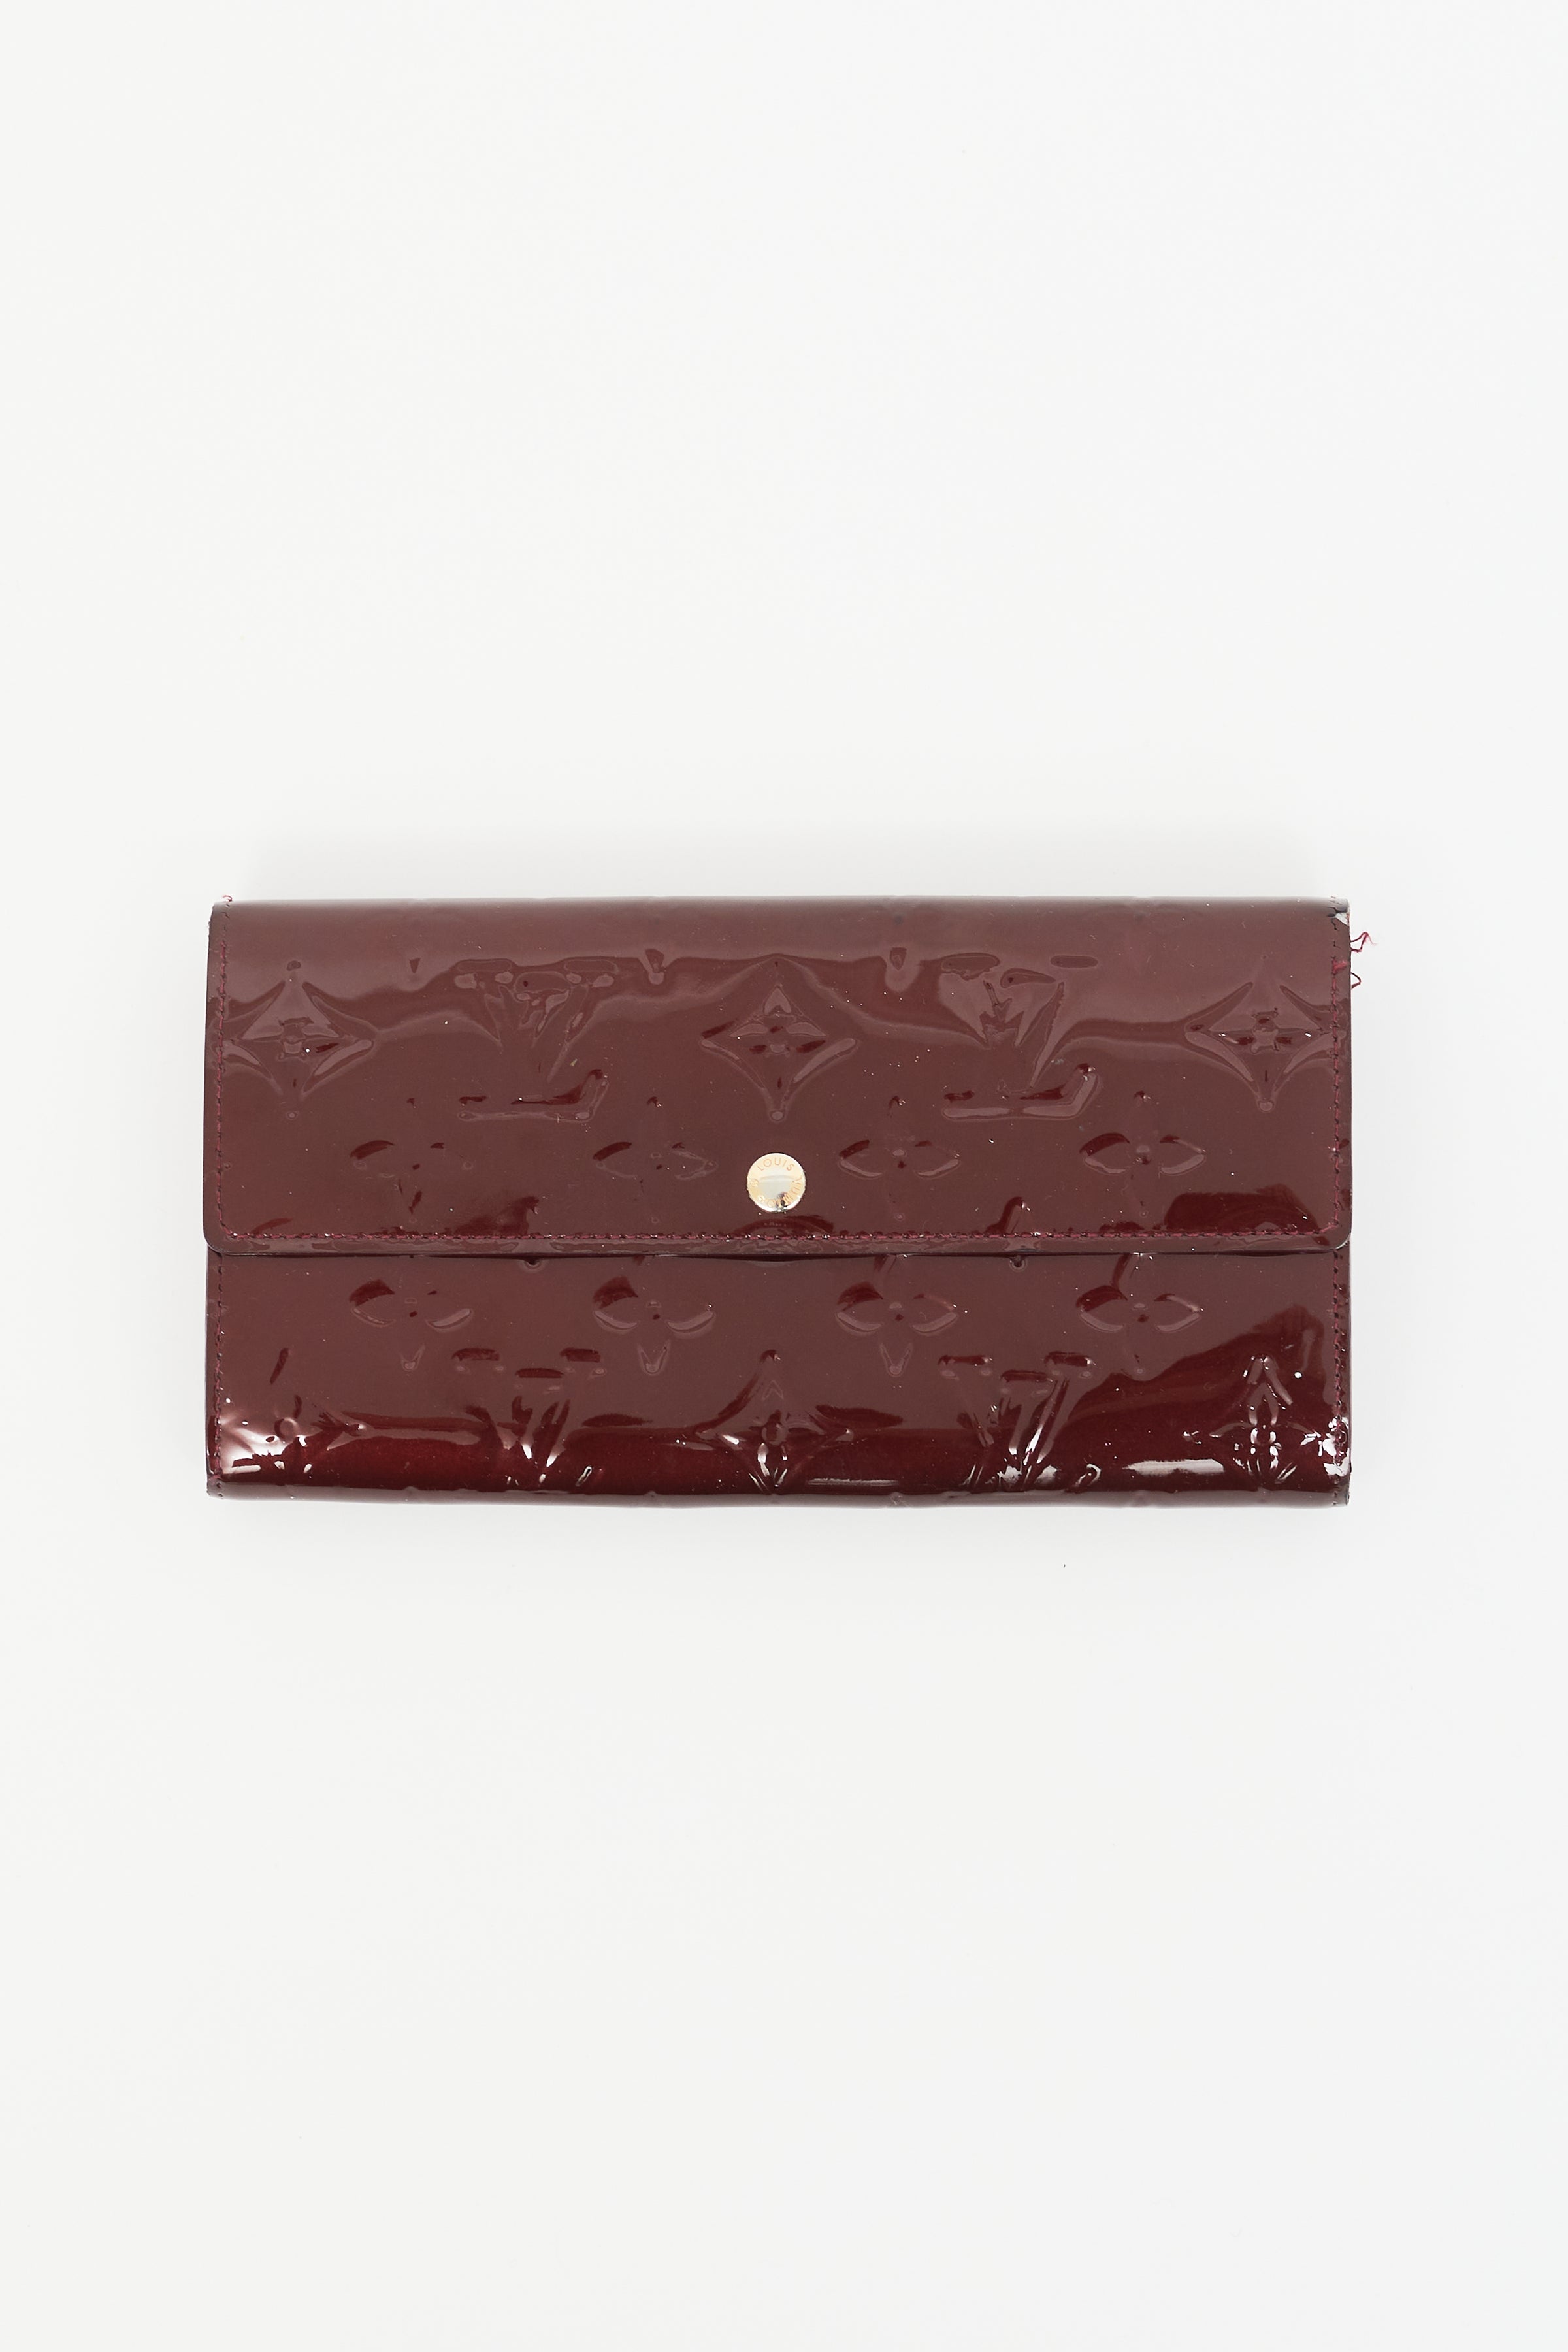 Louis Vuitton Pre-owned Women's Leather Wallet - Burgundy - One Size